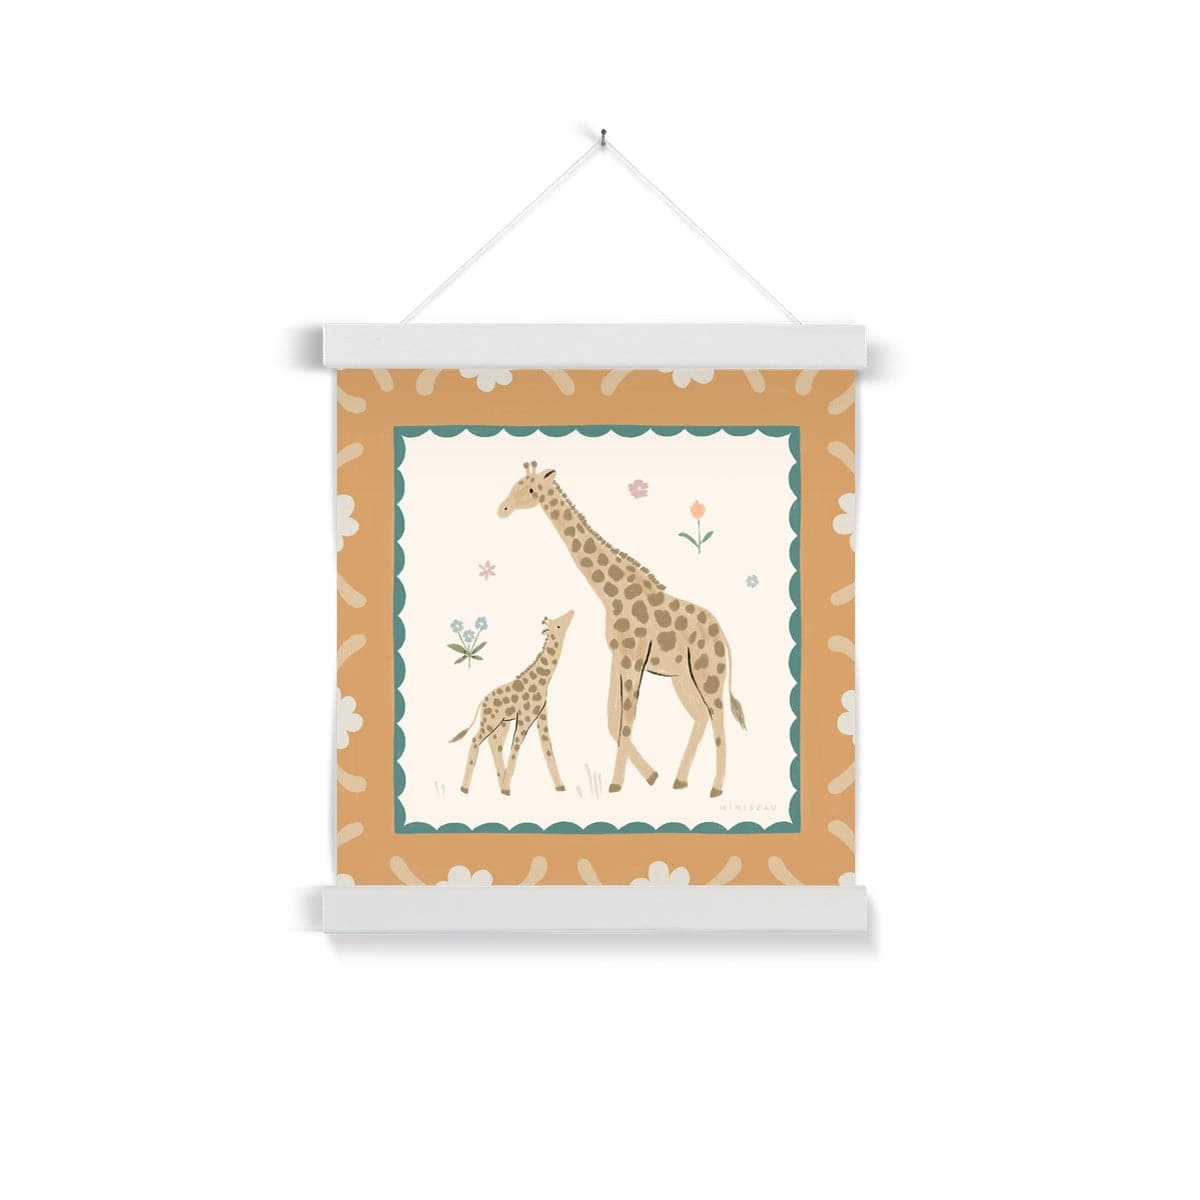 Our pretty Serengeti Giraffe art print is square and features and adult and baby giraffe. facing each other with the baby looking up and the grown up, on a neutral background with some simple flower. The print is bordered with thing green scallops and a thick yellow border featuring white flowers hanging from a nail in a white wooden hanger